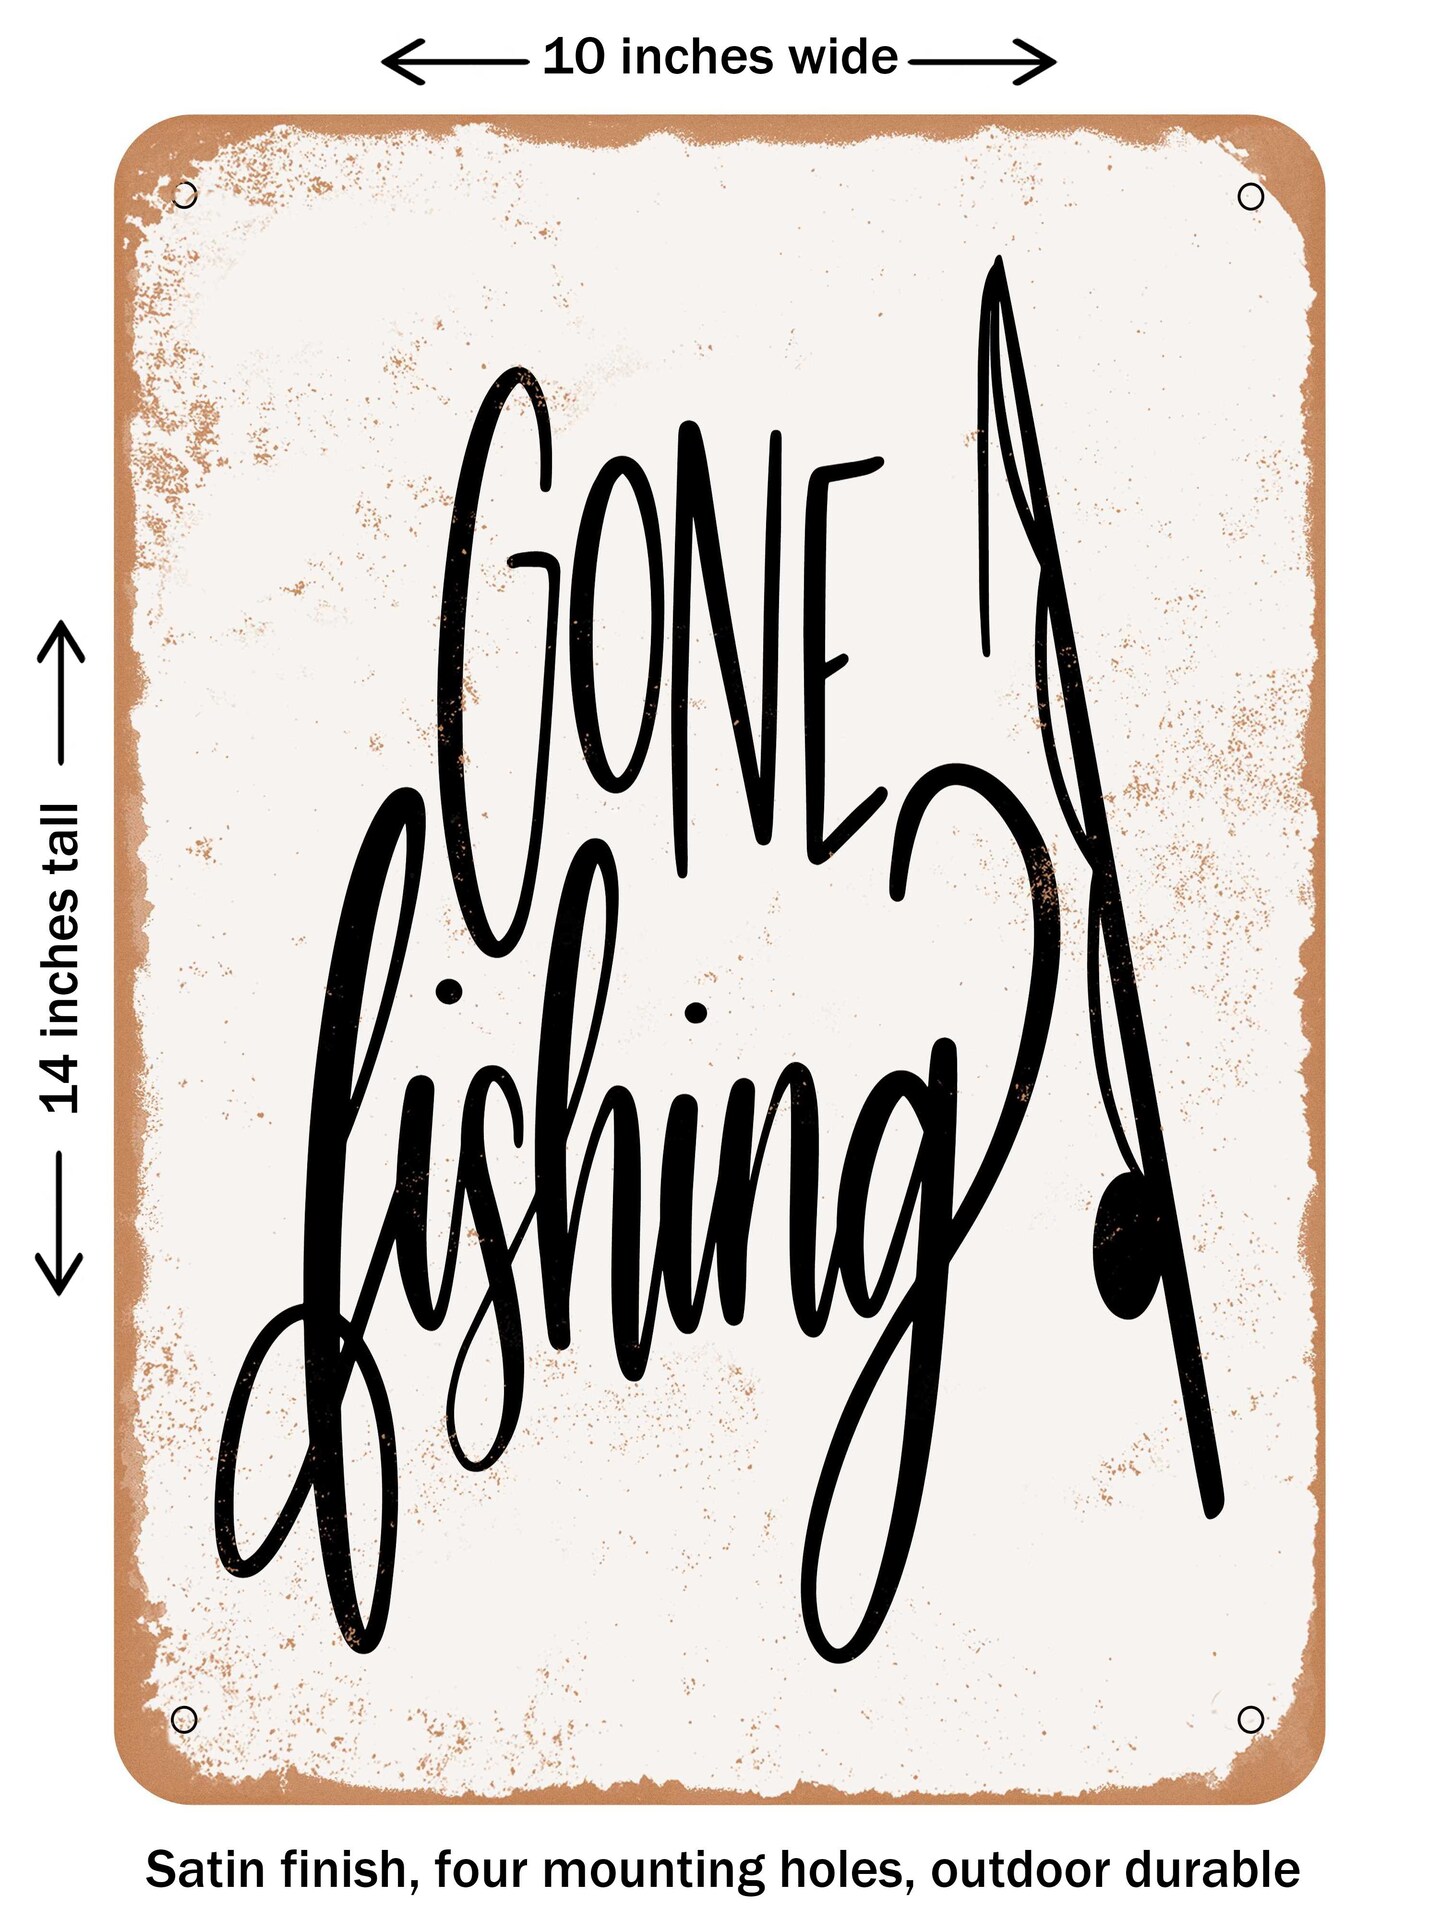 DECORATIVE METAL SIGN - Gone Fishing - Vintage Rusty Look